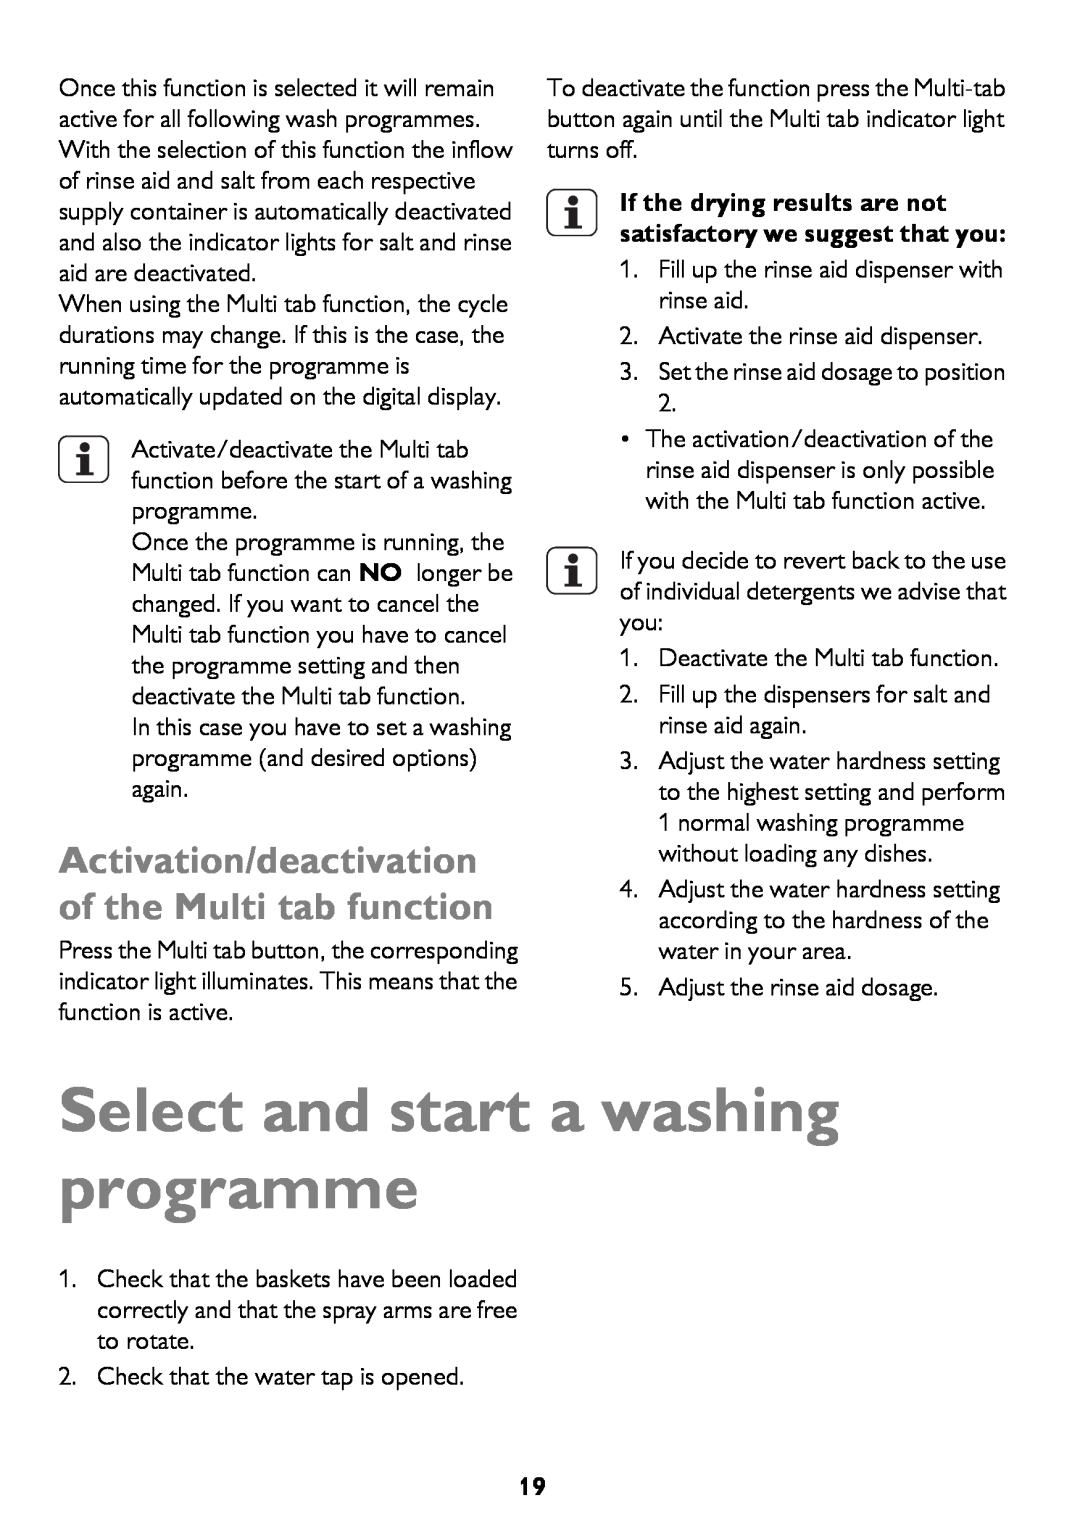 John Lewis JLDWW 1206 Select and start a washing programme, Activation/deactivation of the Multi tab function 